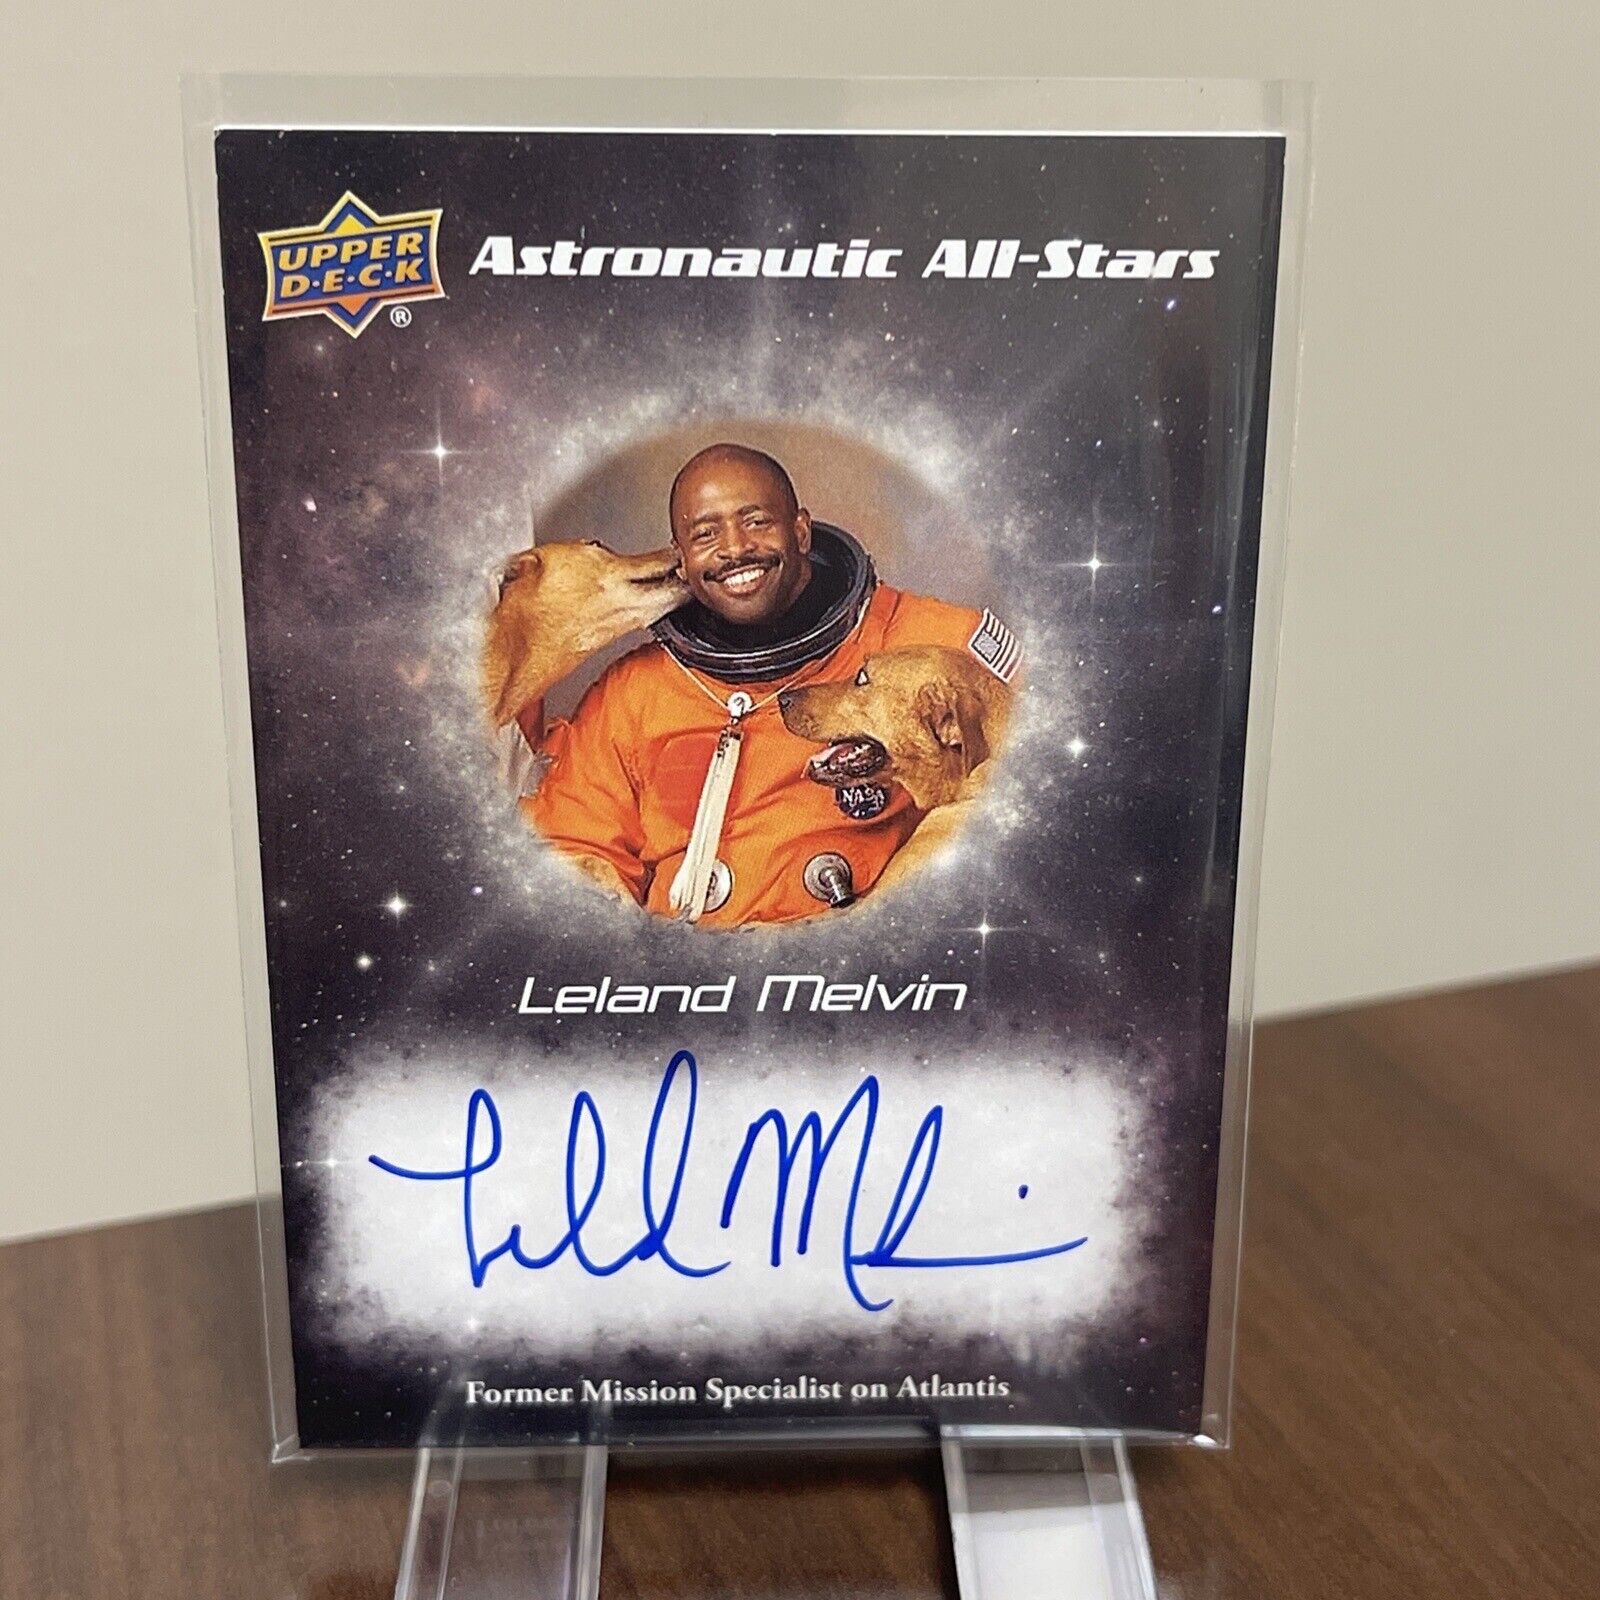 2022 Upper Deck Cosmic Astronautic All-Stars Leland Melvin AAS-LM Auto Dogs NASA